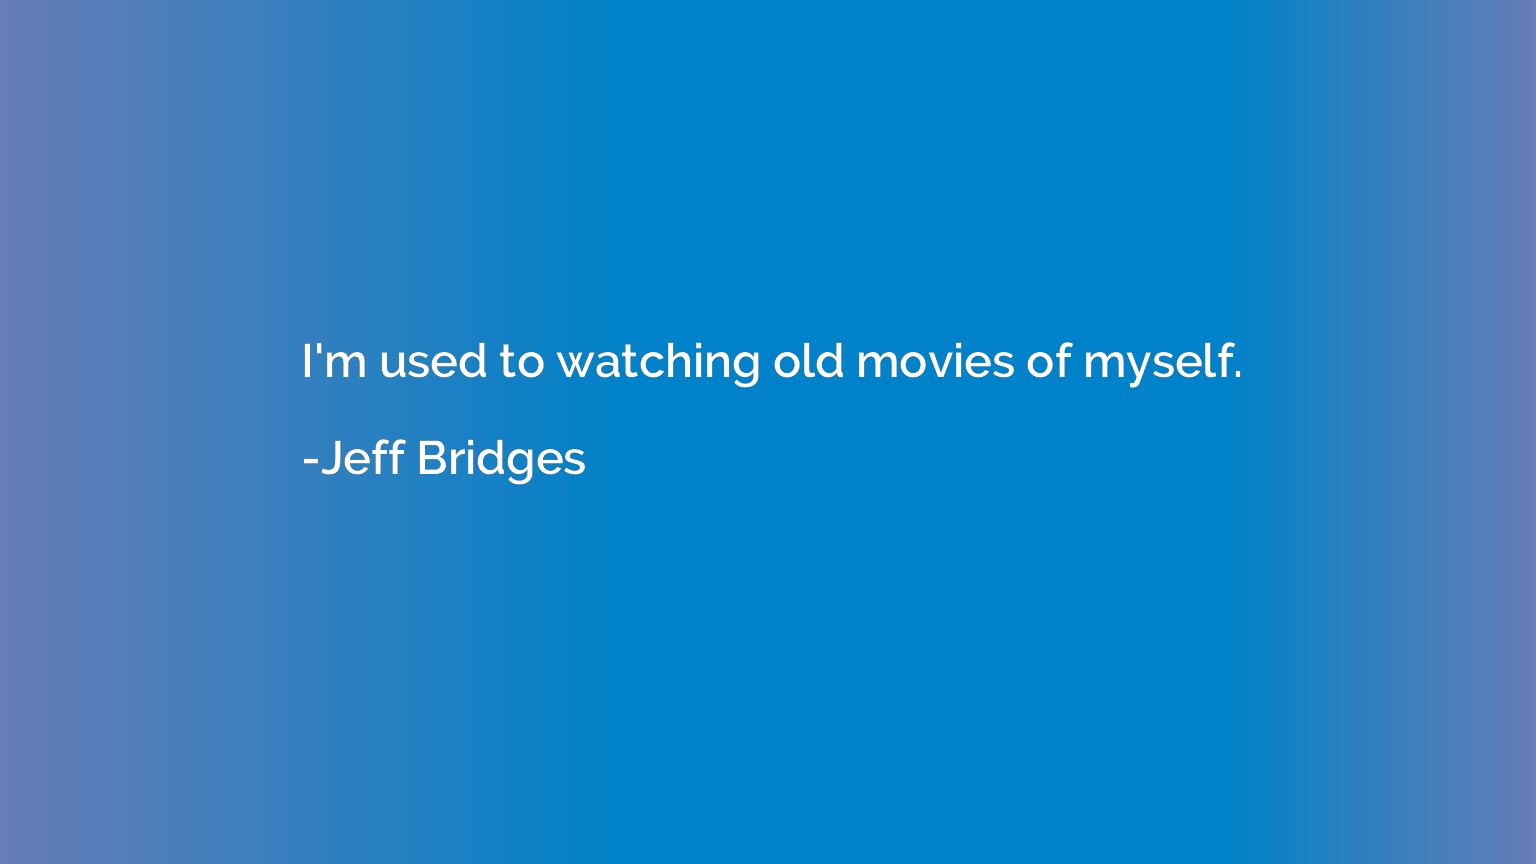 I'm used to watching old movies of myself.